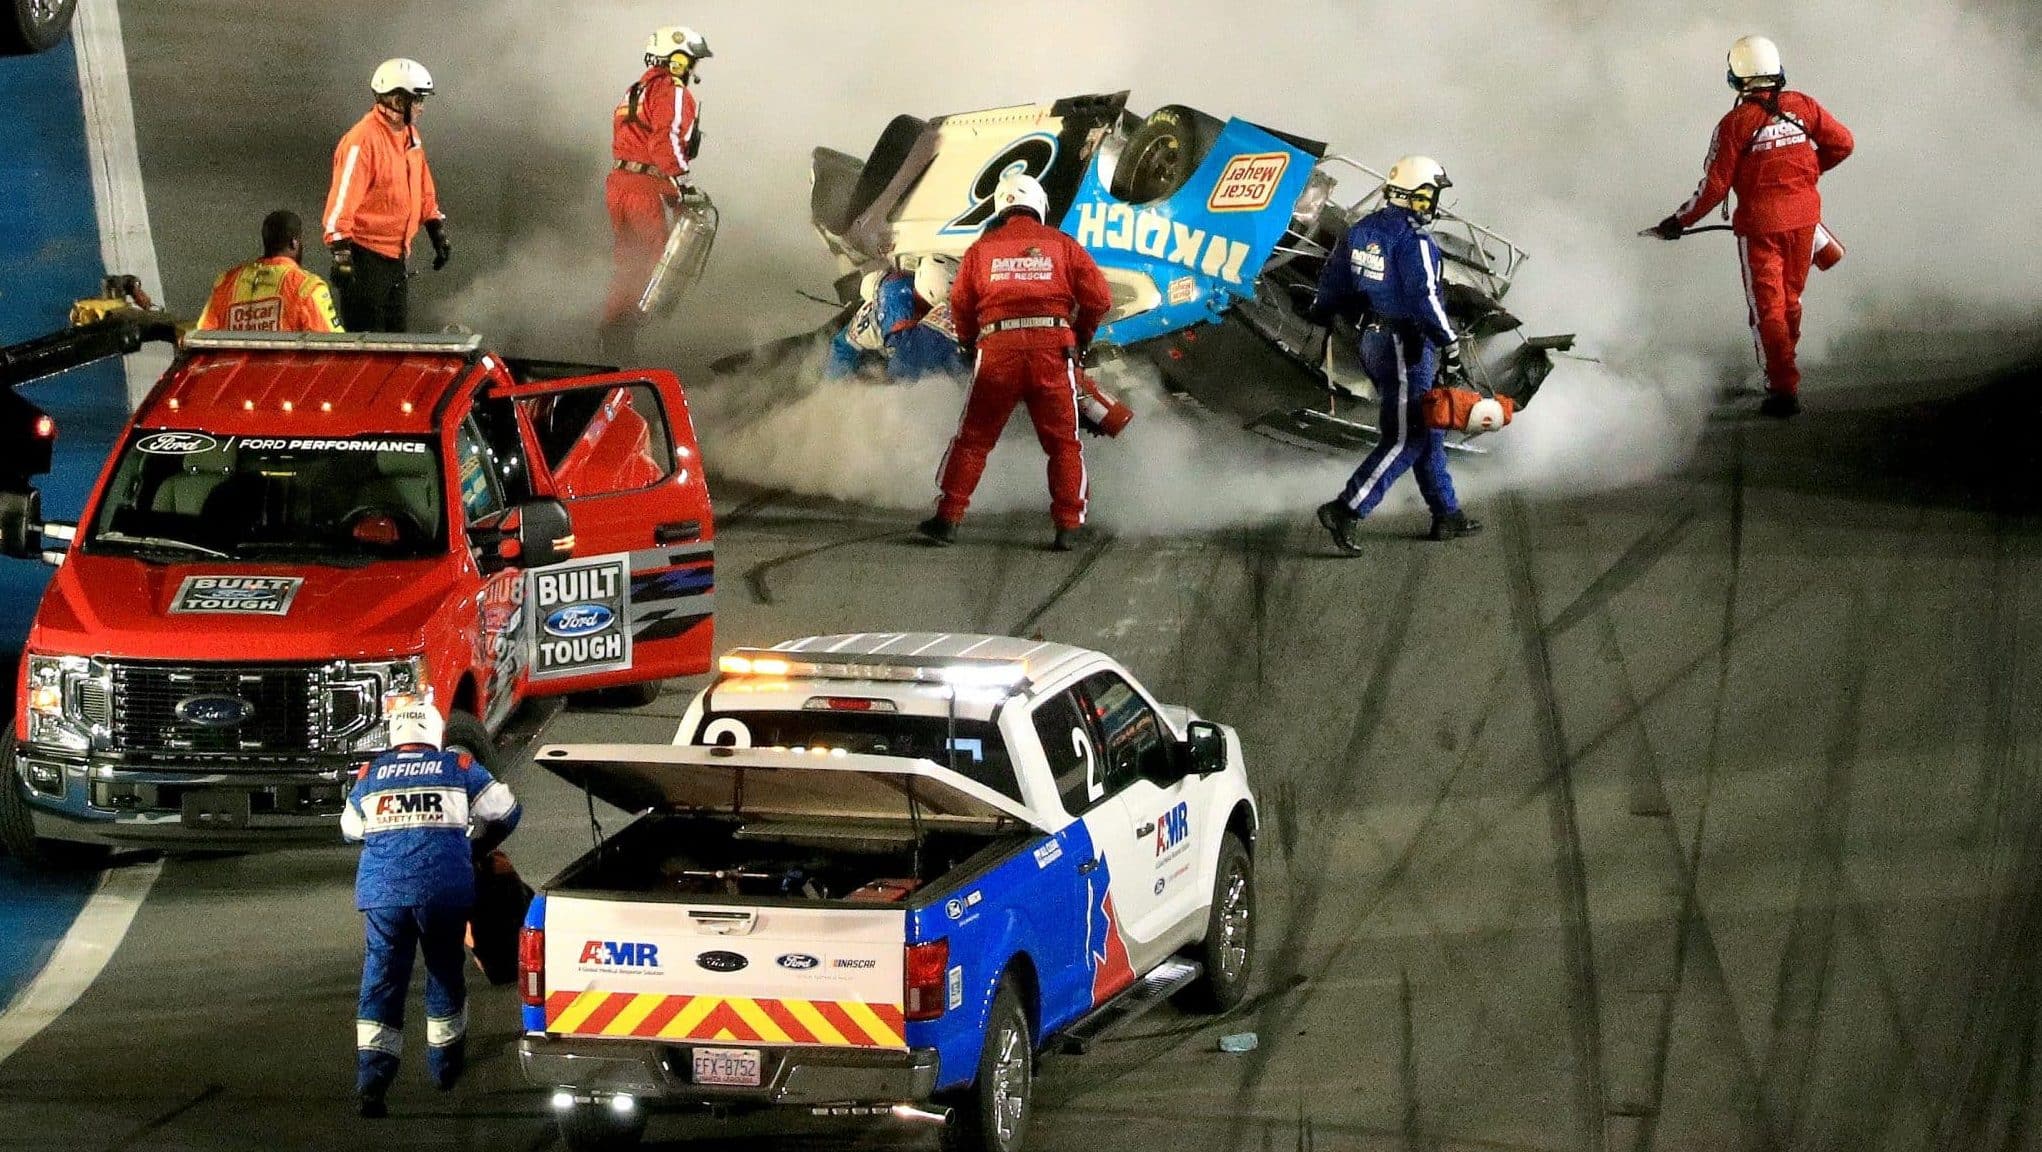 DAYTONA BEACH, FLORIDA - FEBRUARY 17: Track workers attend to Ryan Newman, driver of the #6 Koch Industries Ford, following a crash during the NASCAR Cup Series 62nd Annual Daytona 500 at Daytona International Speedway on February 17, 2020 in Daytona Beach, Florida.